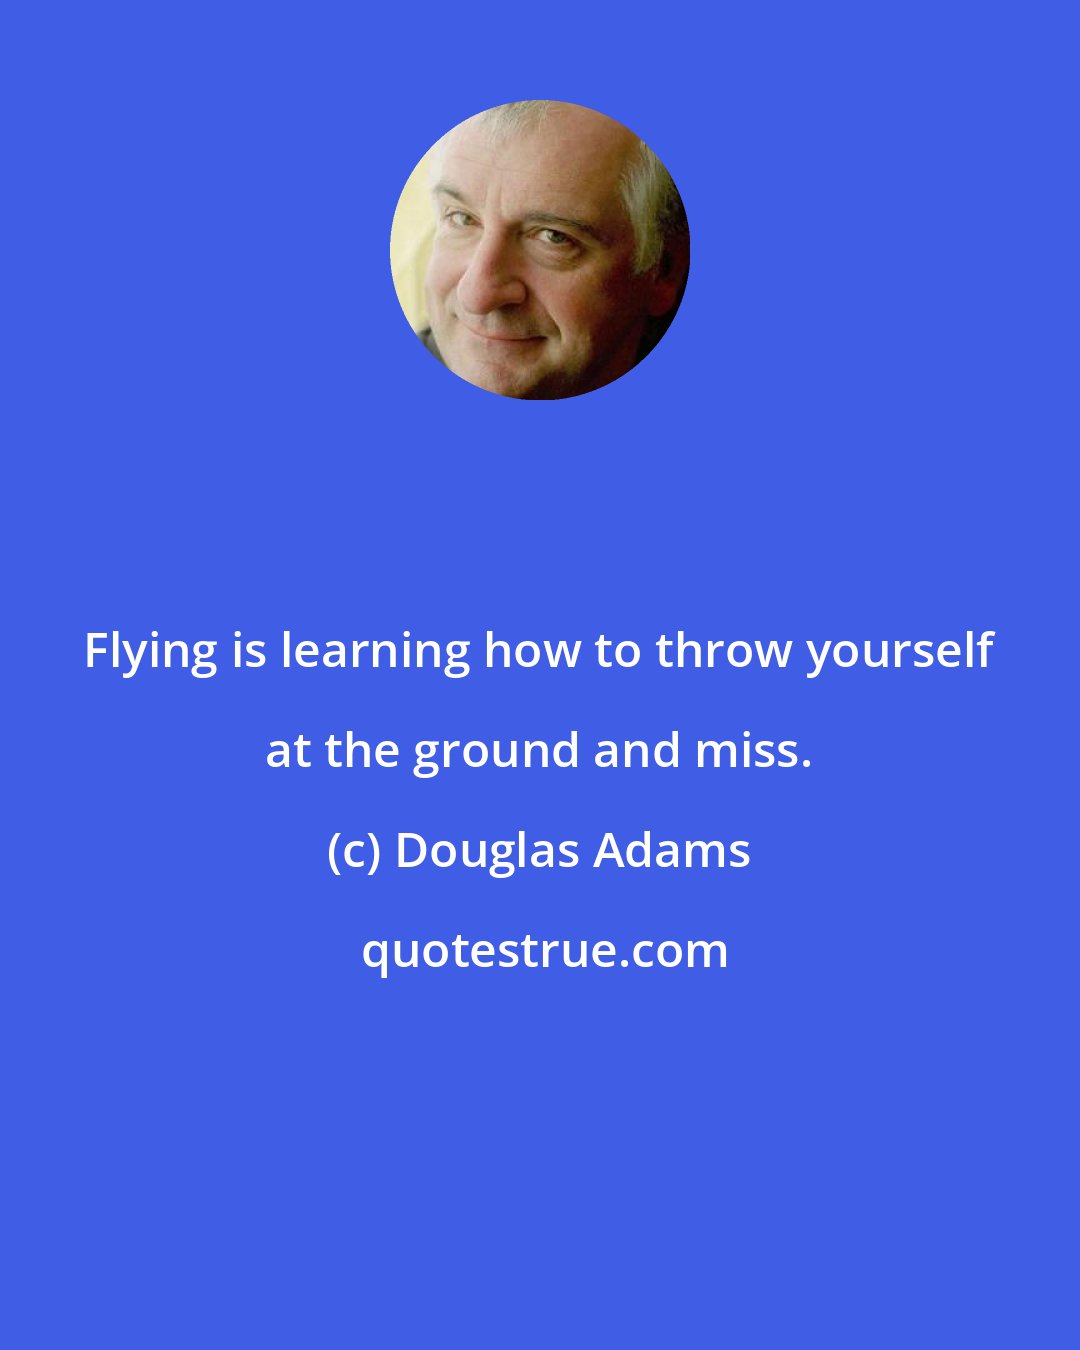 Douglas Adams: Flying is learning how to throw yourself at the ground and miss.